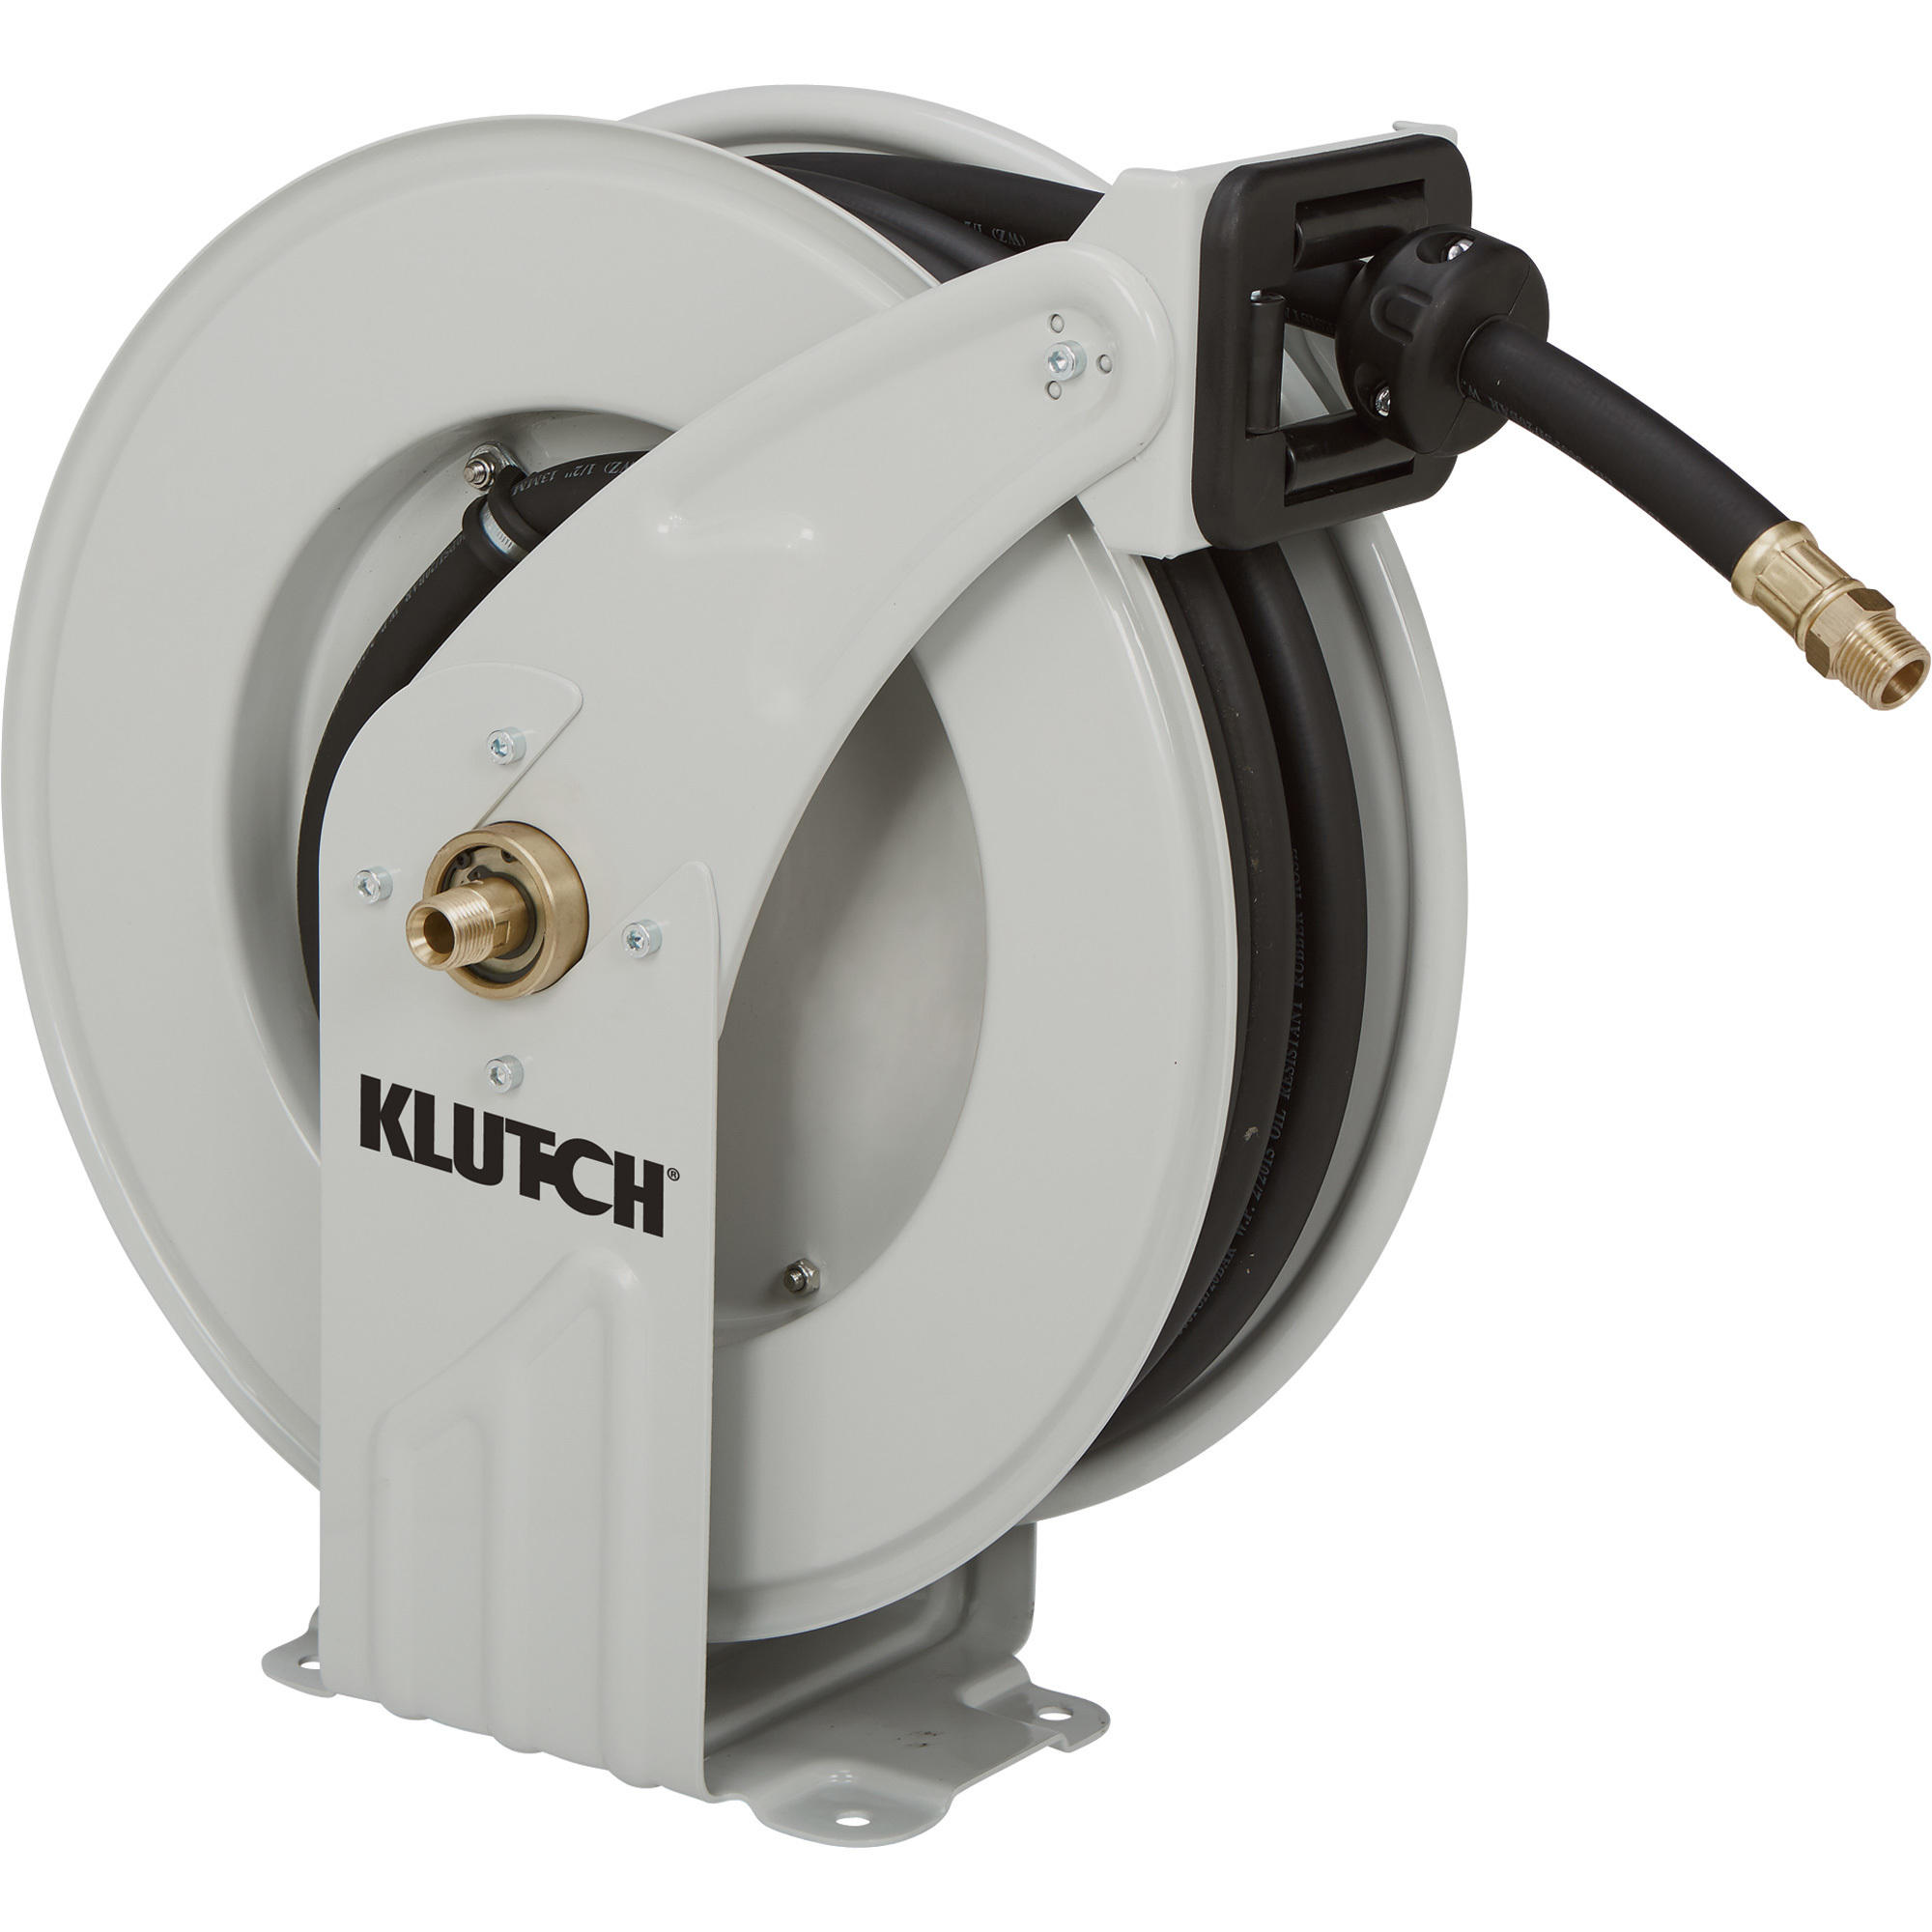 Klutch Auto Rewind Air Hose Reel, With 1/2in. x 50ft. NRB Rubber